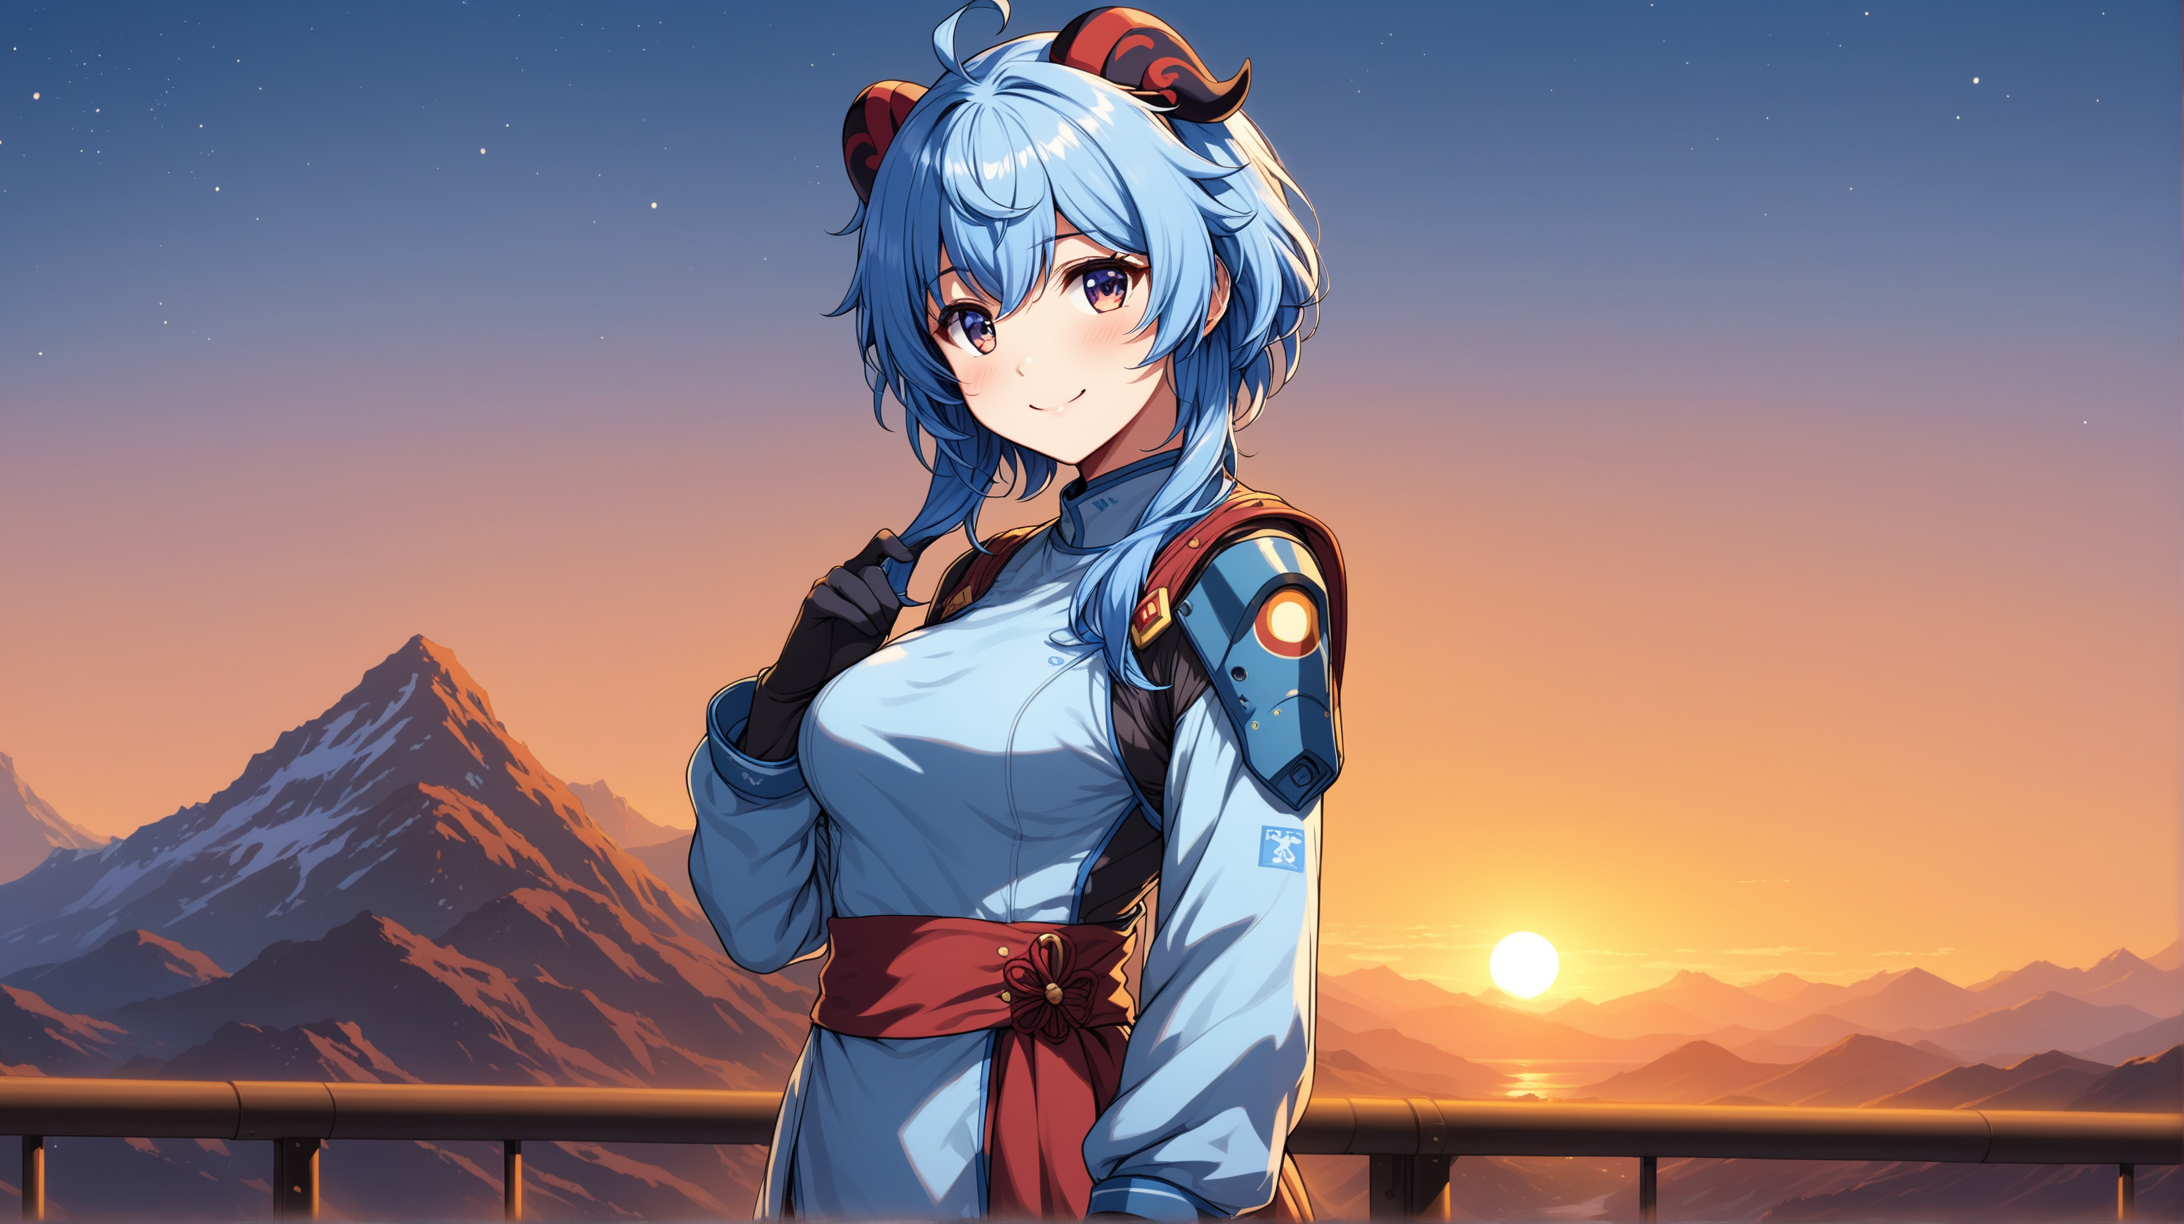 Draw the character Ganyu, high quality, outdoors, in a confident pose, looking over her shoulder, during the evening, wearing an outfit inspired from the Fallout series, smiling at the viewer